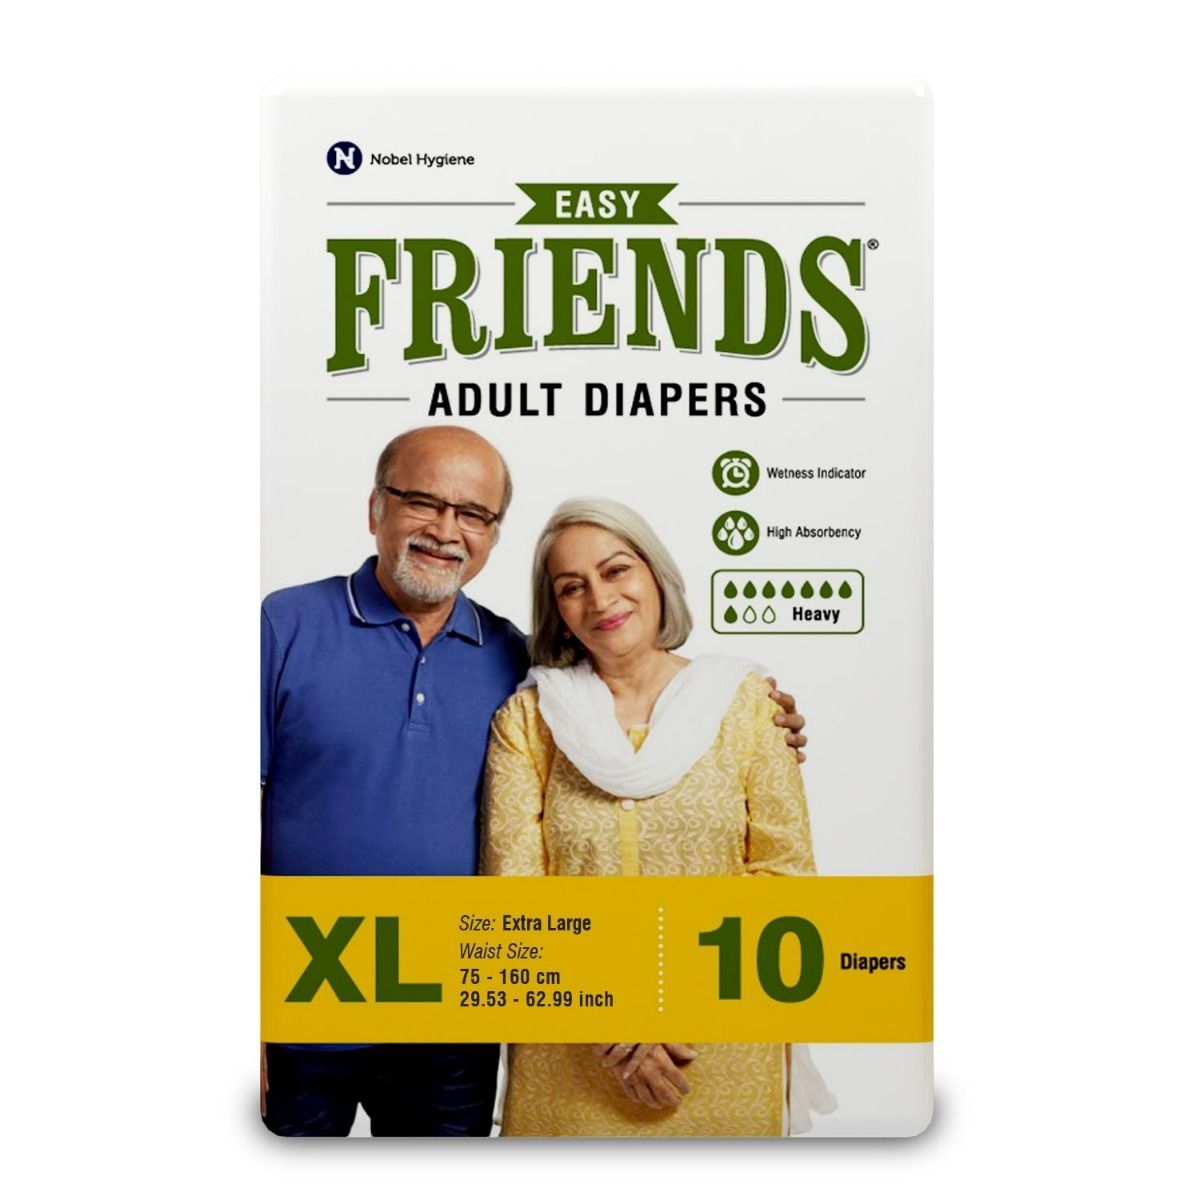 Friends Easy Adult Diapers XL, 10 Count, Pack of 1 